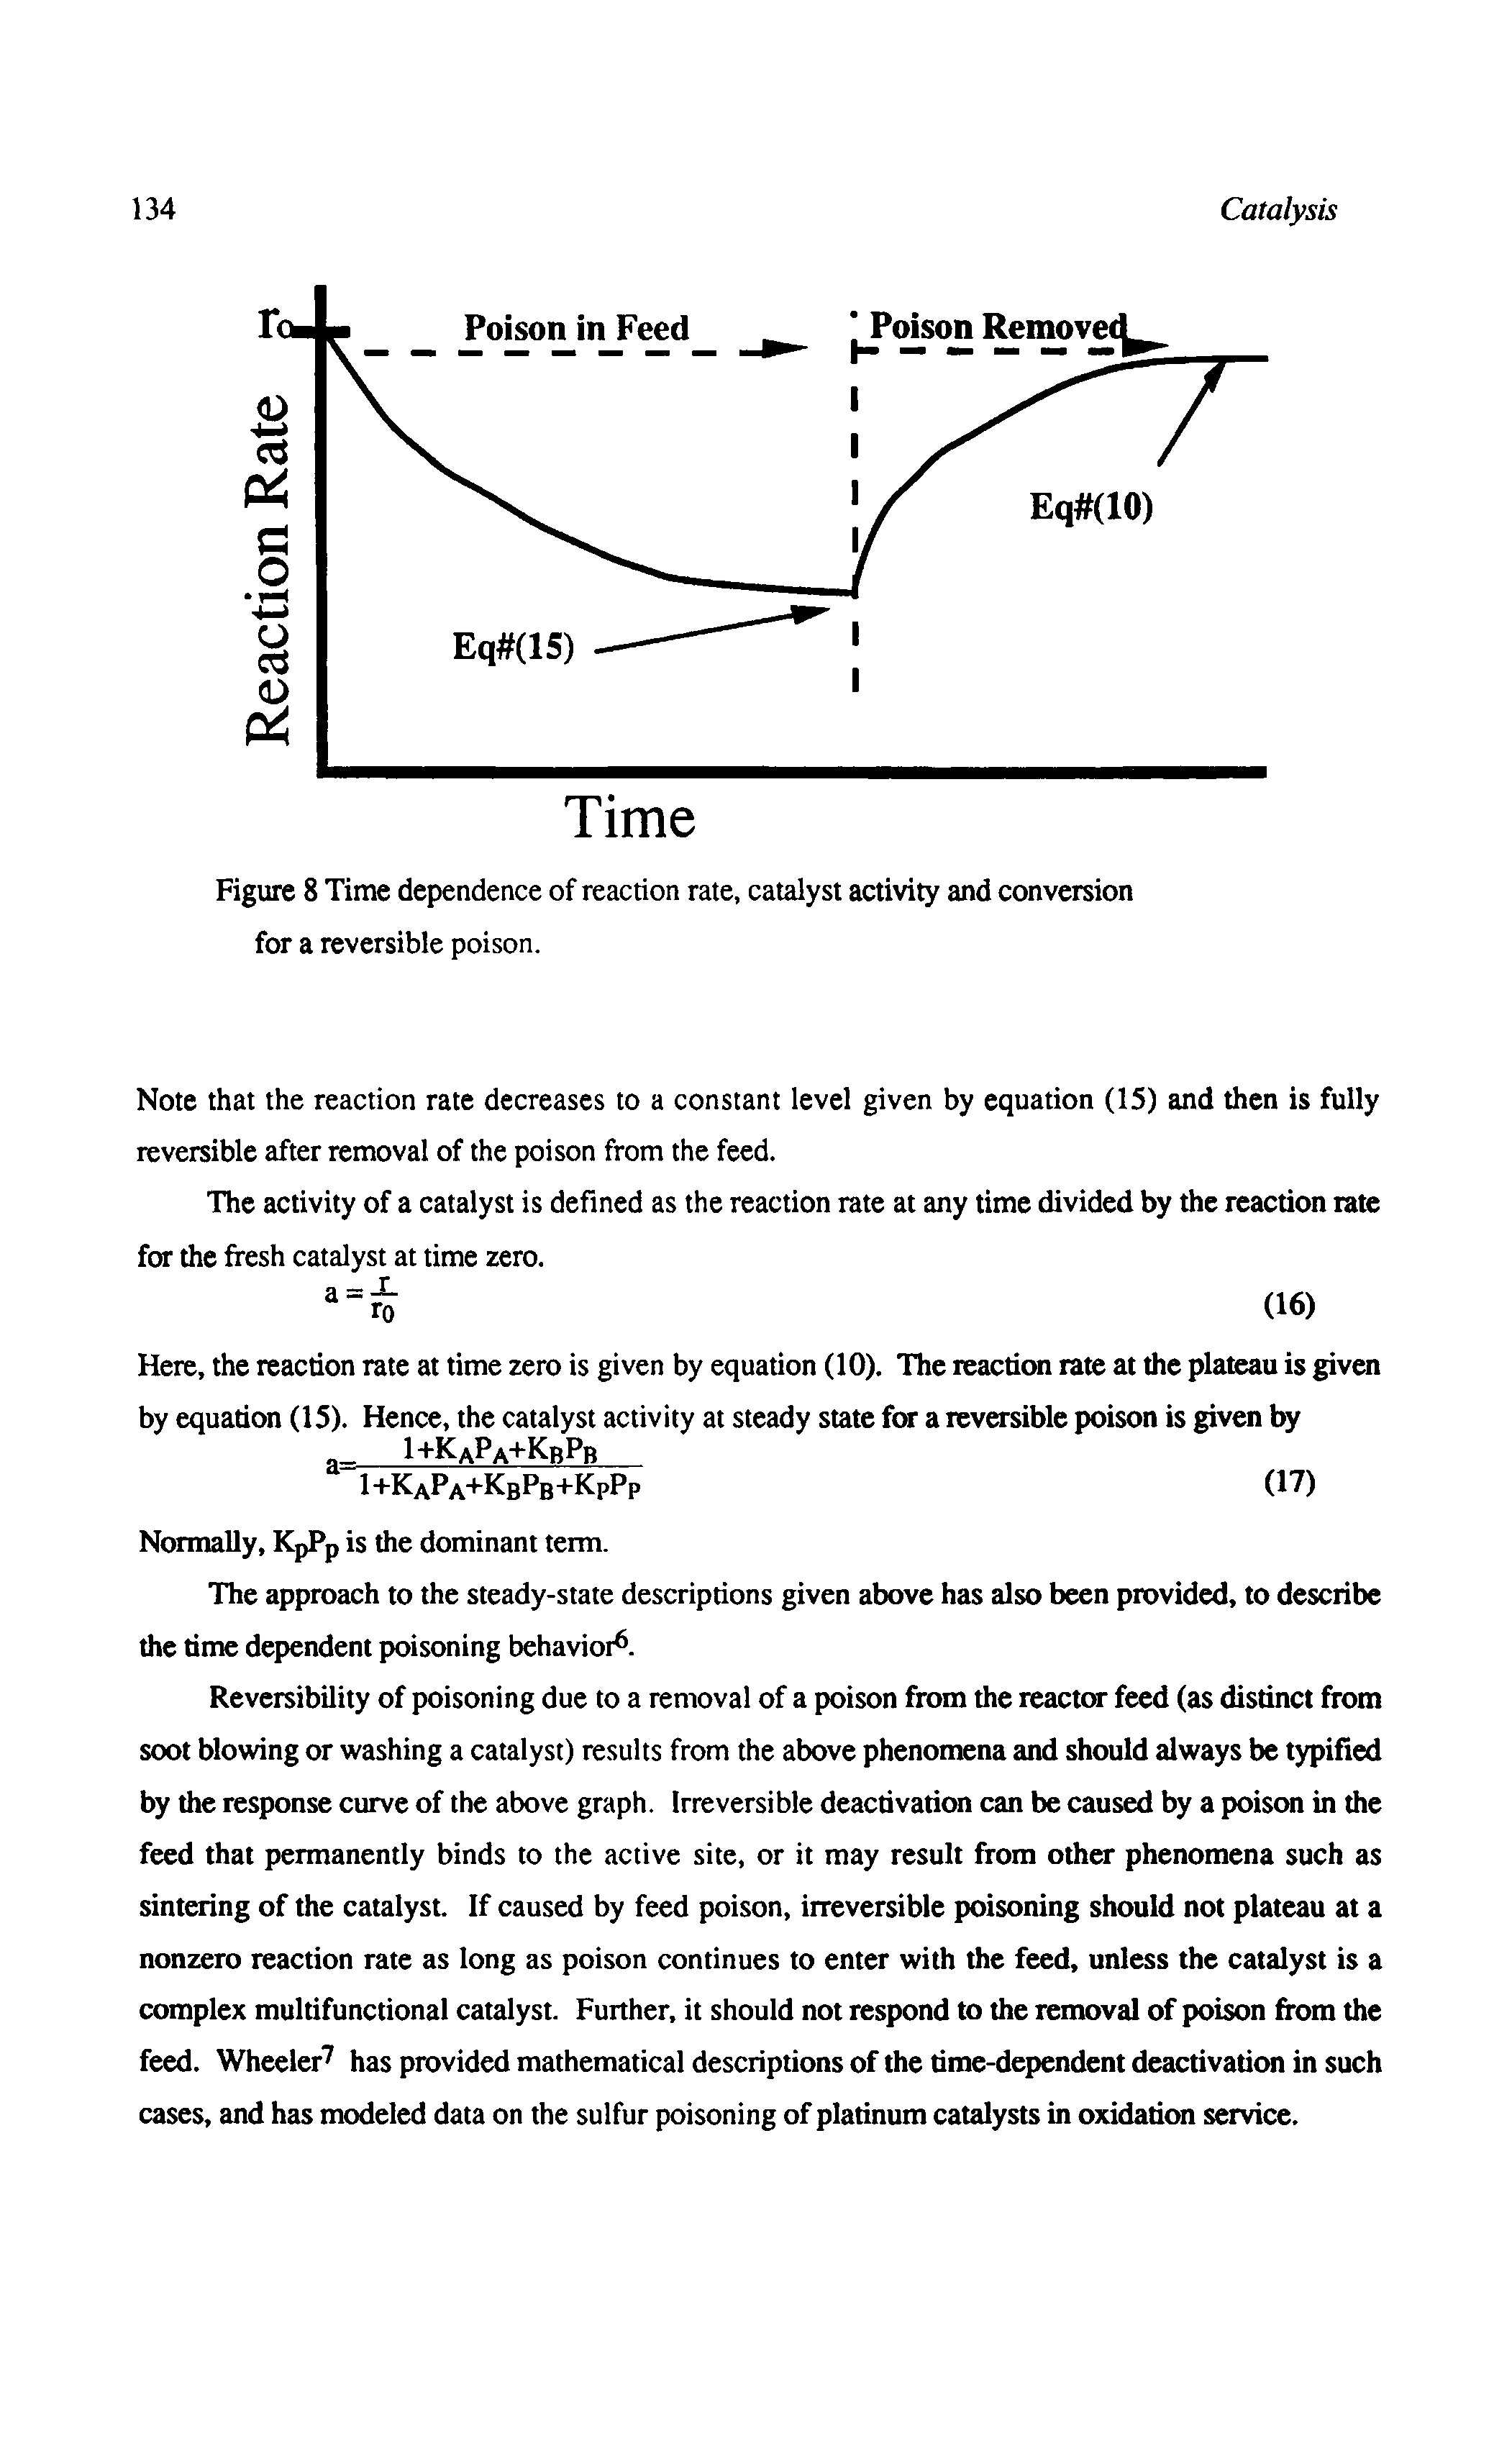 Figure 8 Time dependence of reaction rate, catalyst activity and conversion for a reversible poison.